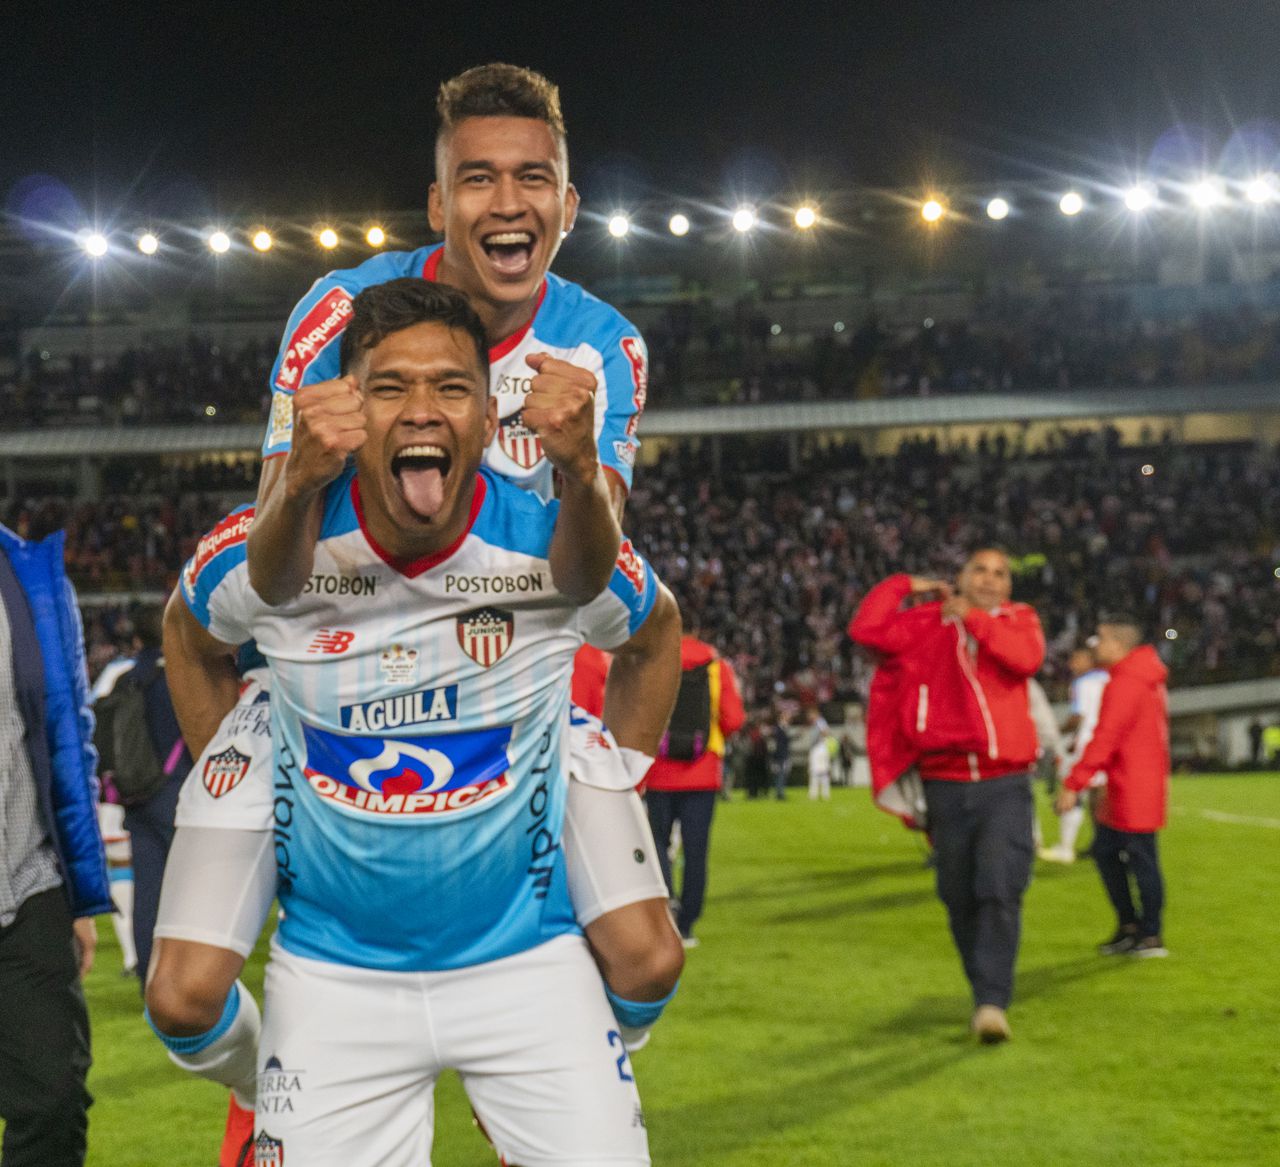 Teofilo Gutiérrez and Víctor Cantillo of Atletico Junior celebrate winning the Torneo Apertura Liga Aguila 2019 championship in the penalty shootout after a second leg match between Deportivo Pasto and Atletico Junior 2019 at Estadio El Campin on June 12, 2019 in Bogota, Colombia. (Photo by Daniel Garzon Herazo/NurPhoto via Getty Images)